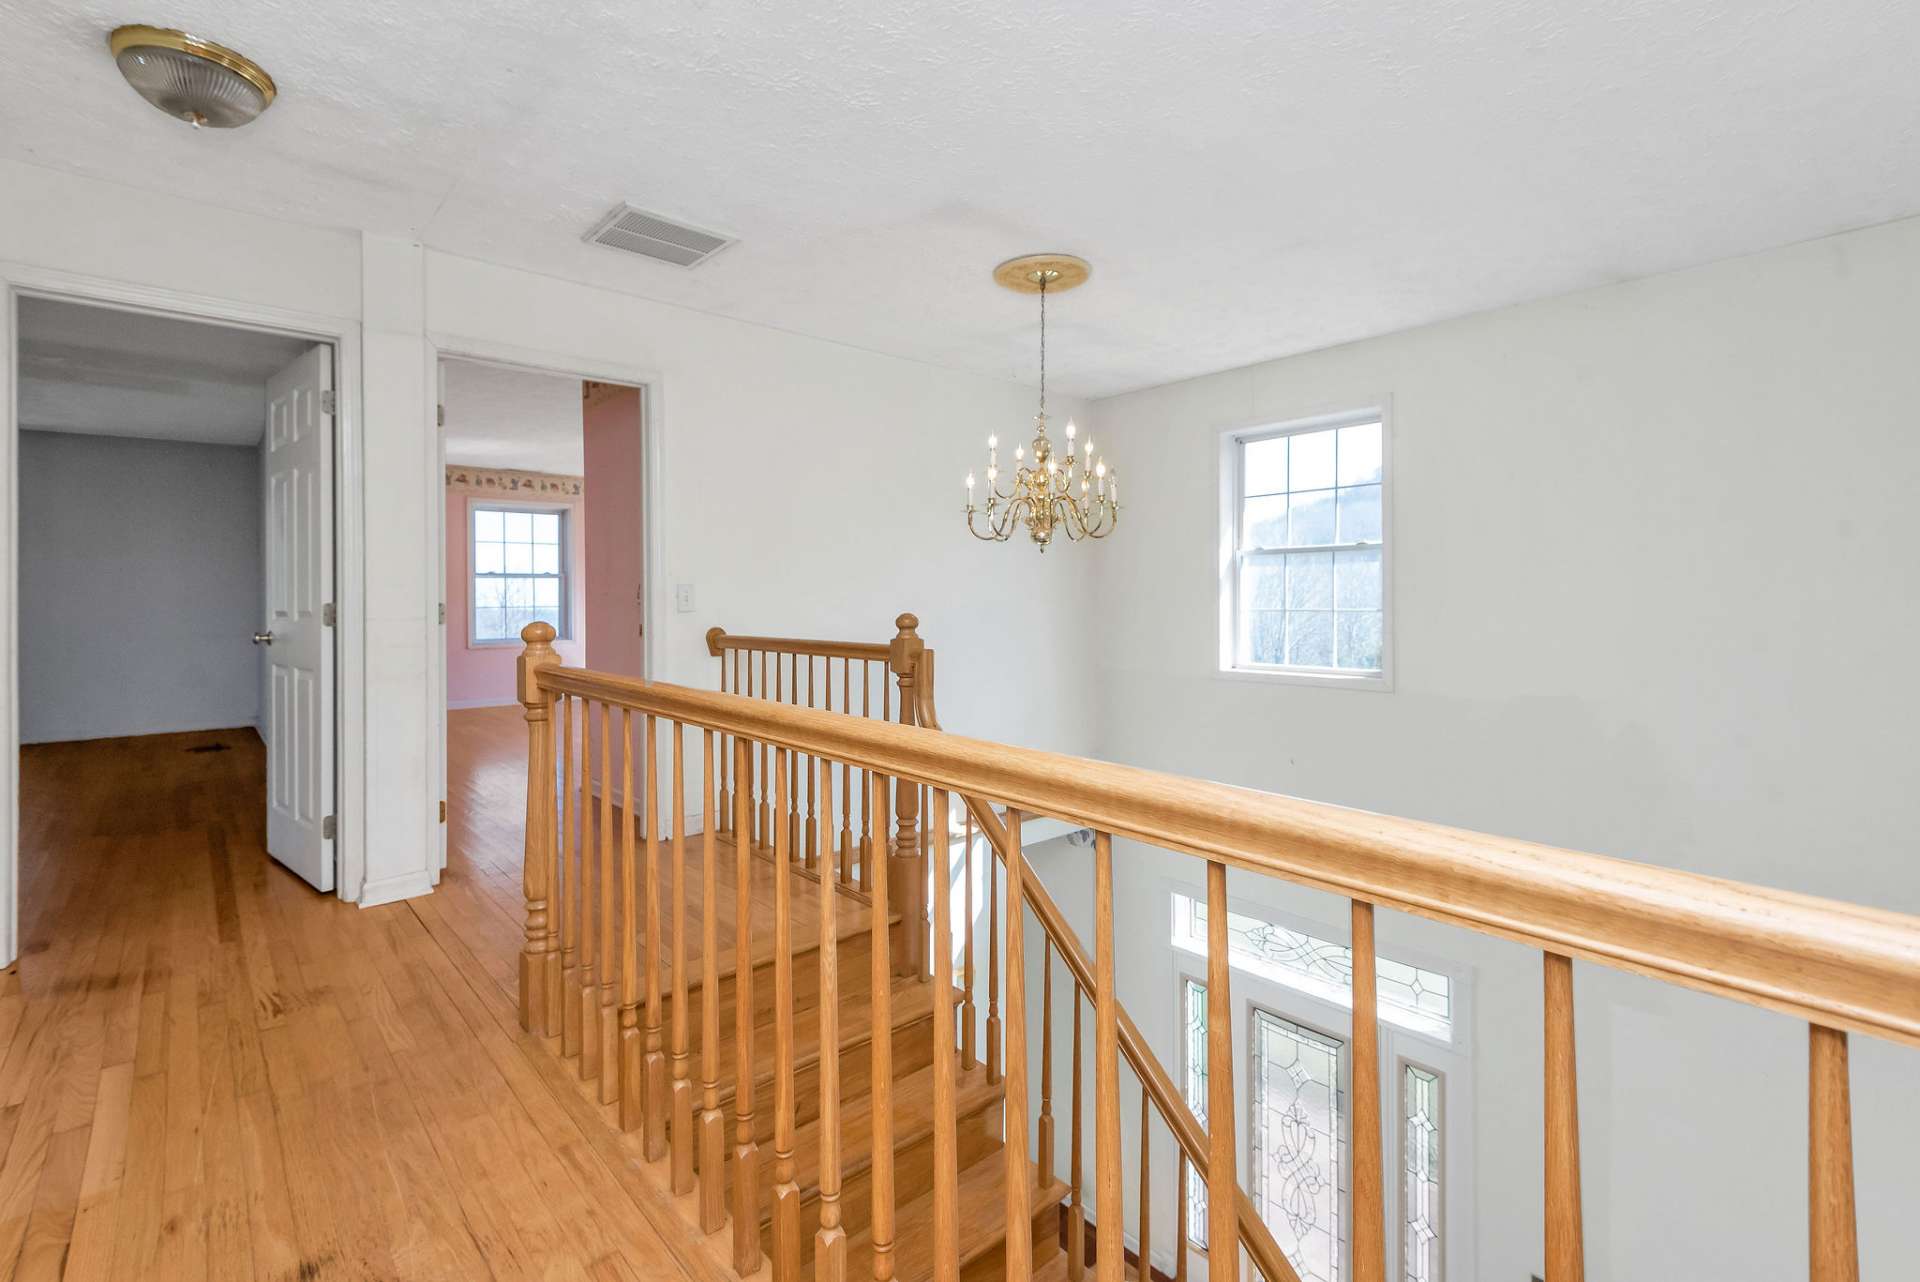 Upper level starts with 2 bedrooms to the right as you ascend the top of the stairs.